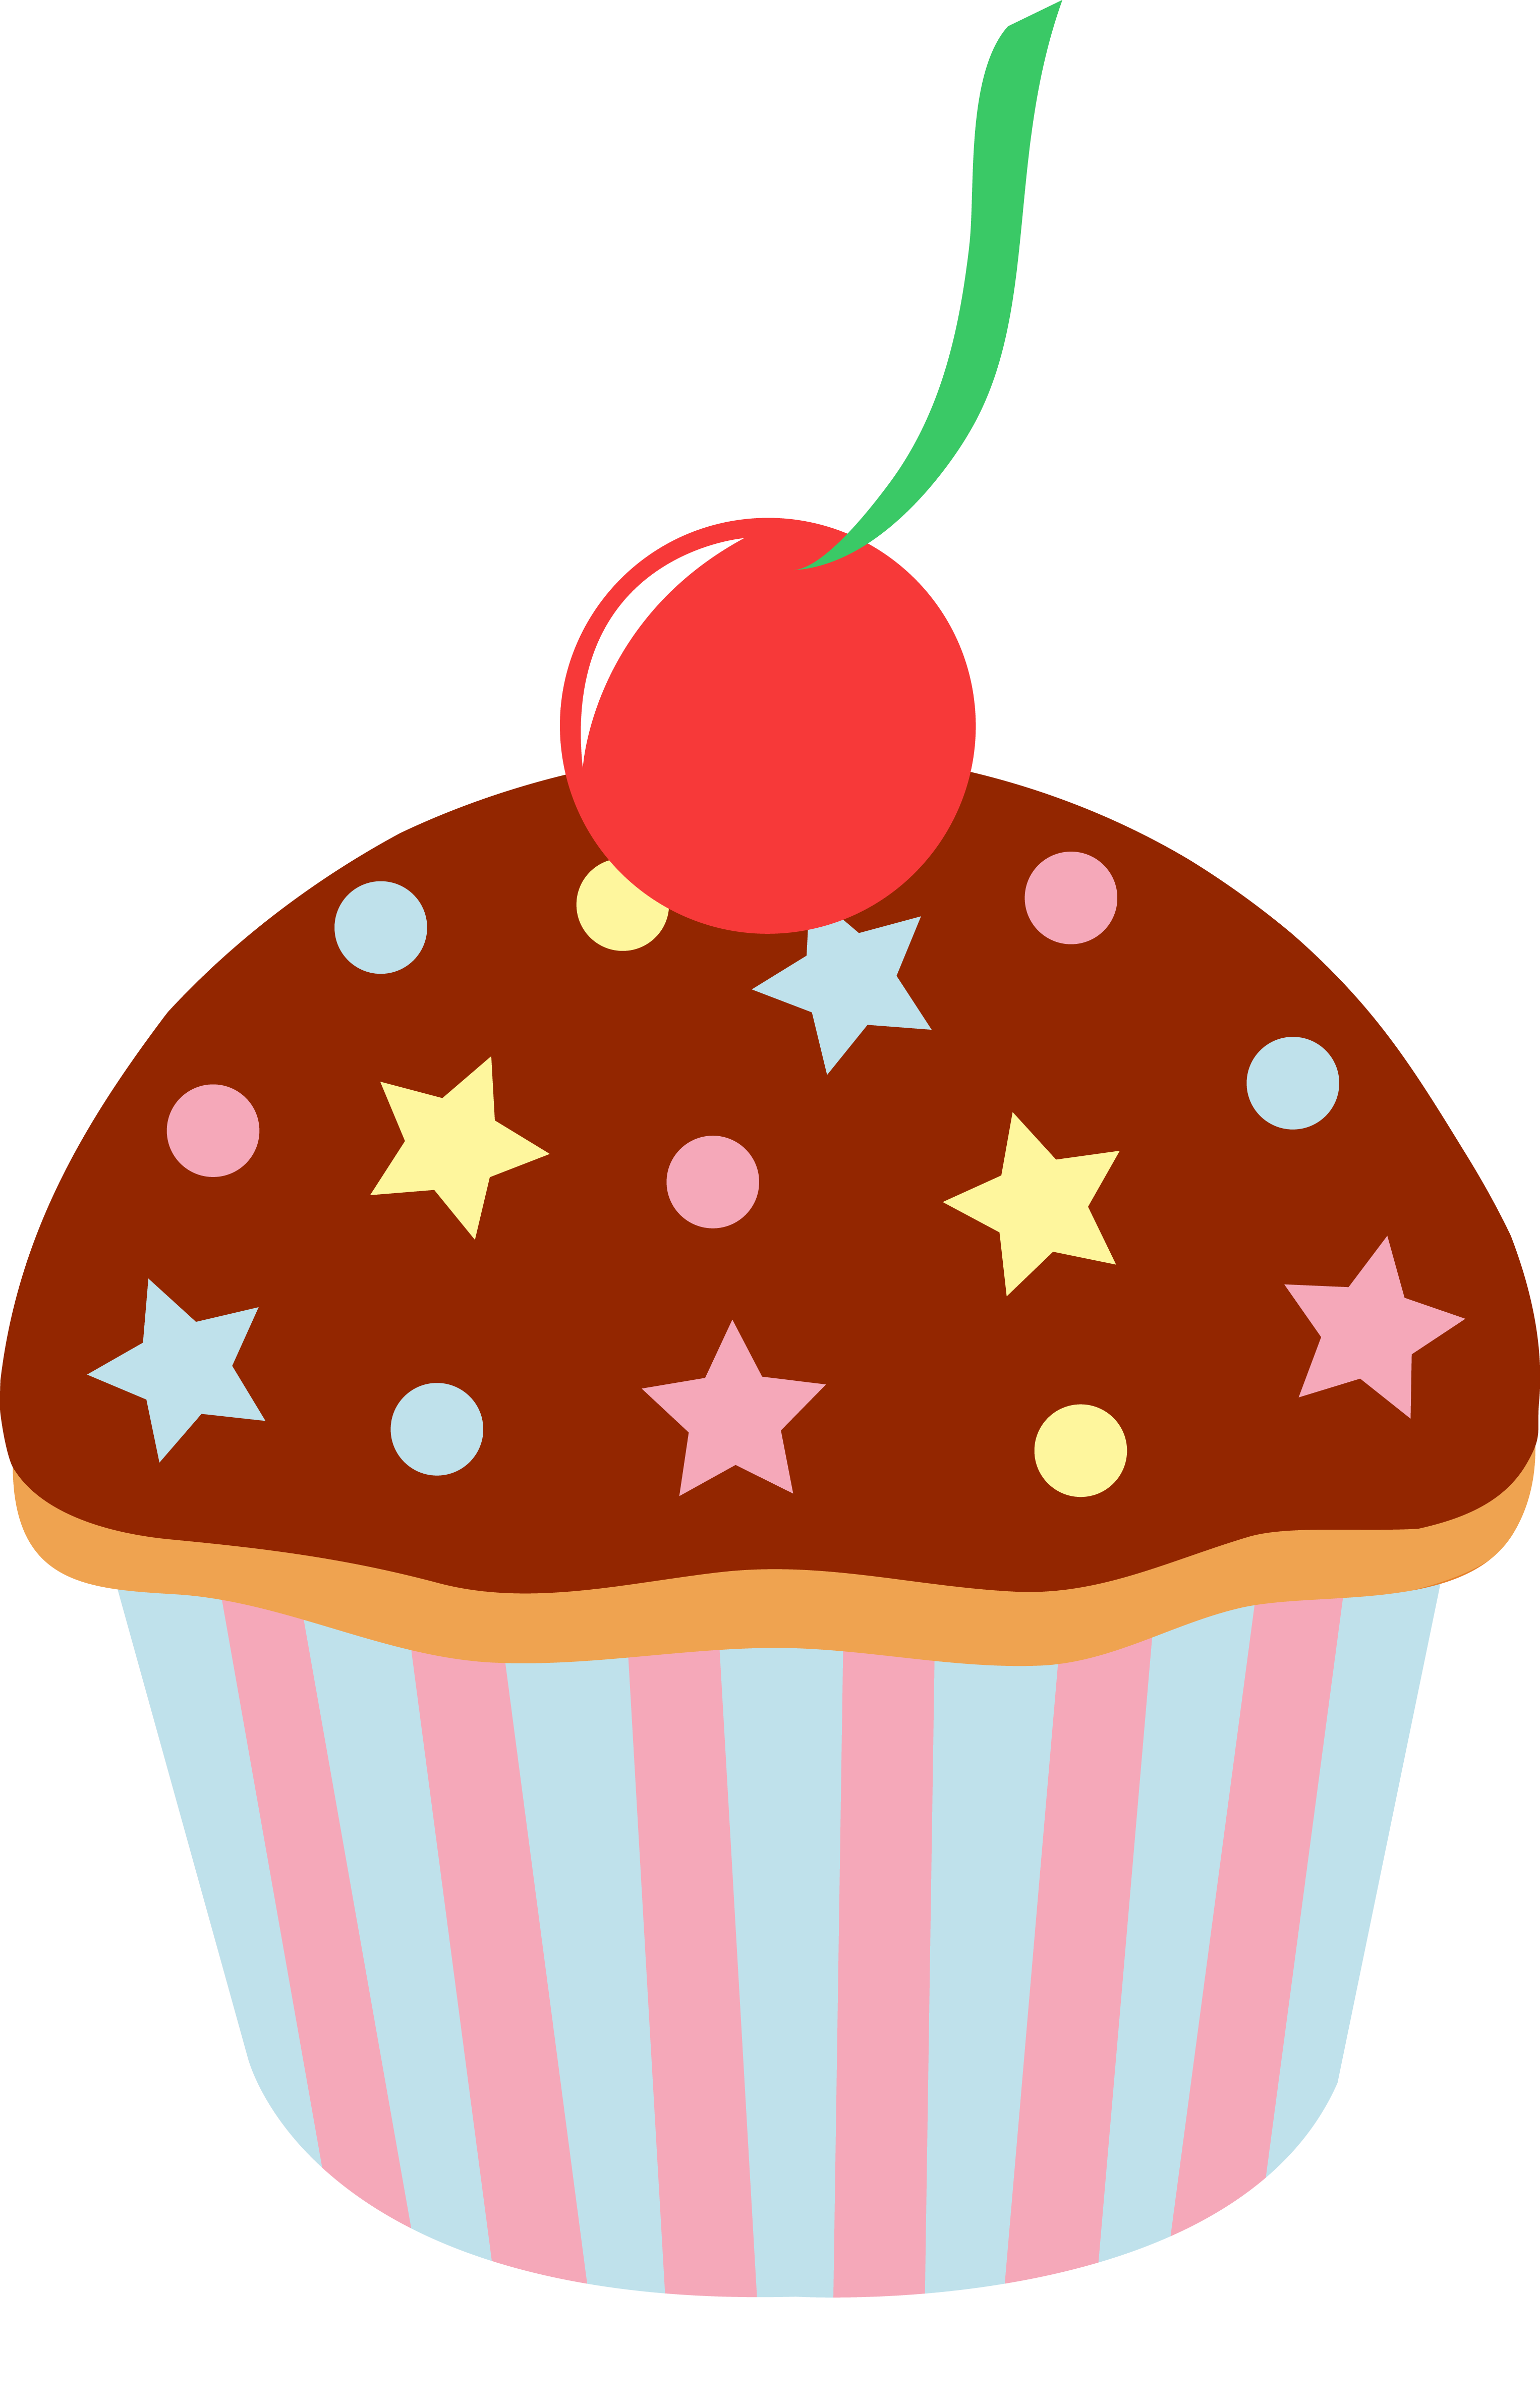 Muffins clipart bake sale item. Come prepared to face